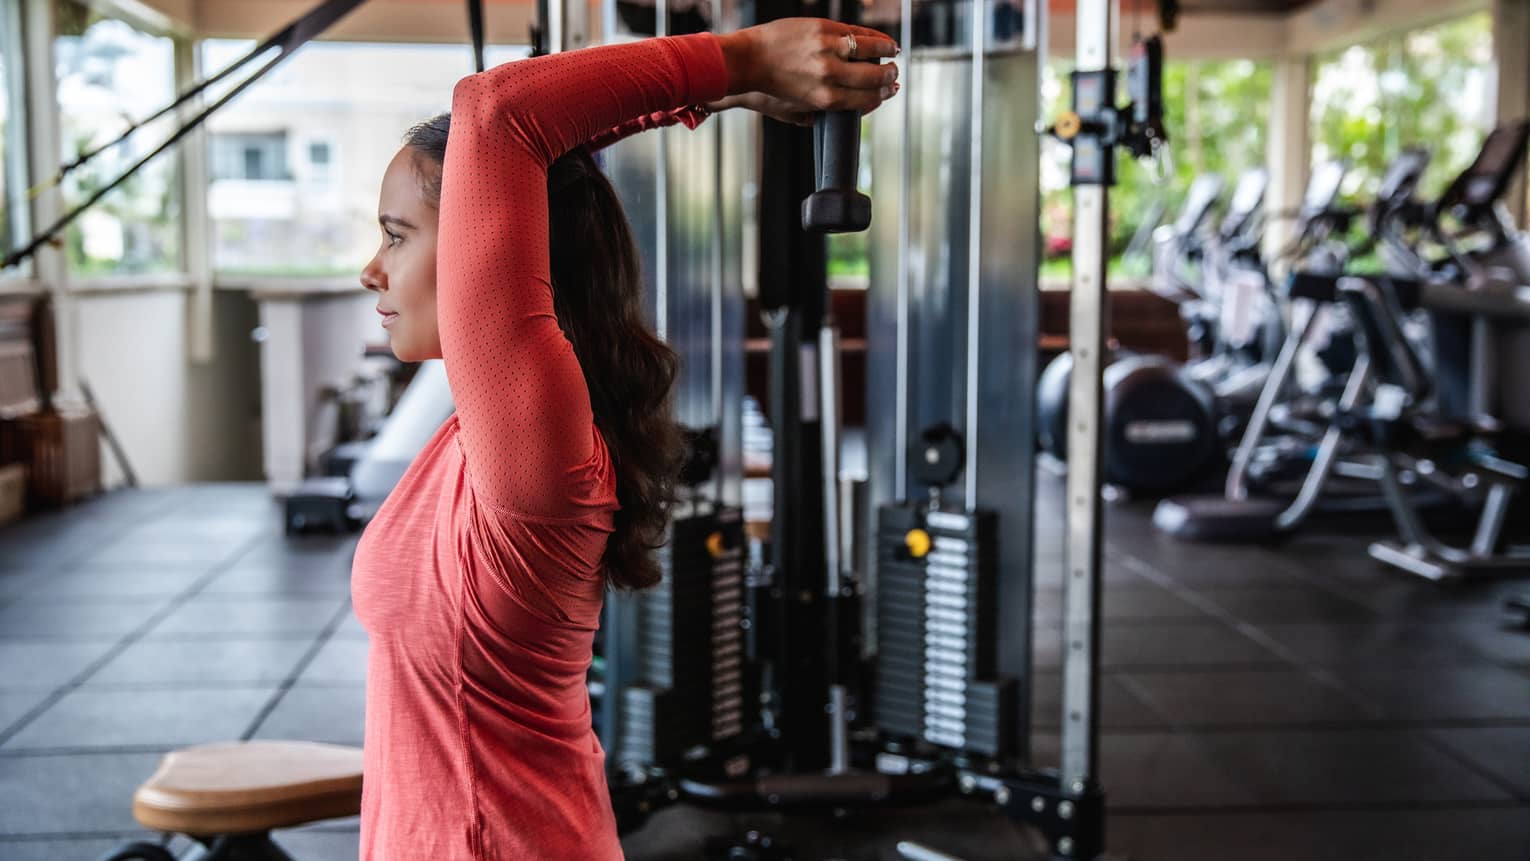 A woman lifts wights above her head at the gym